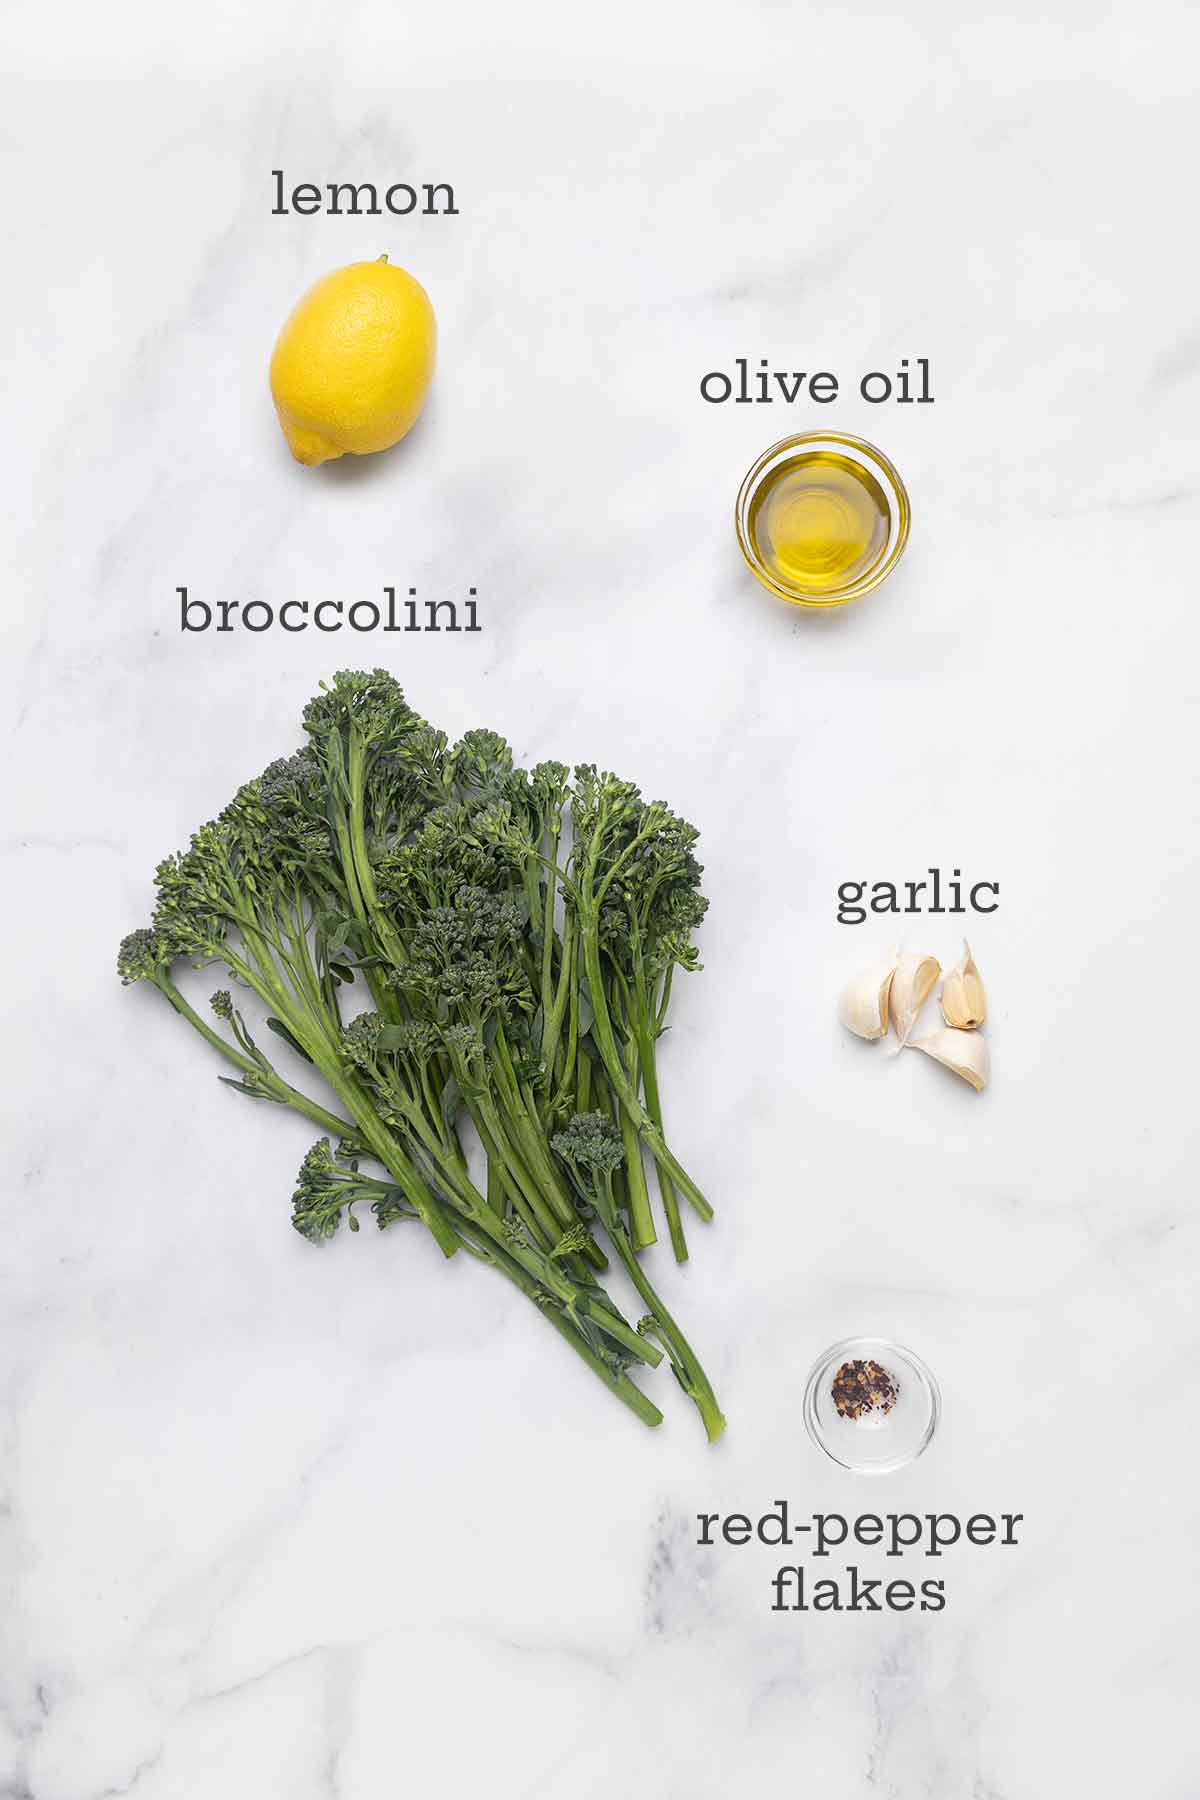 Ingredients for skillet-charred broccolini--broccolini, lemon, olive oil, garlic, and pepper flakes.